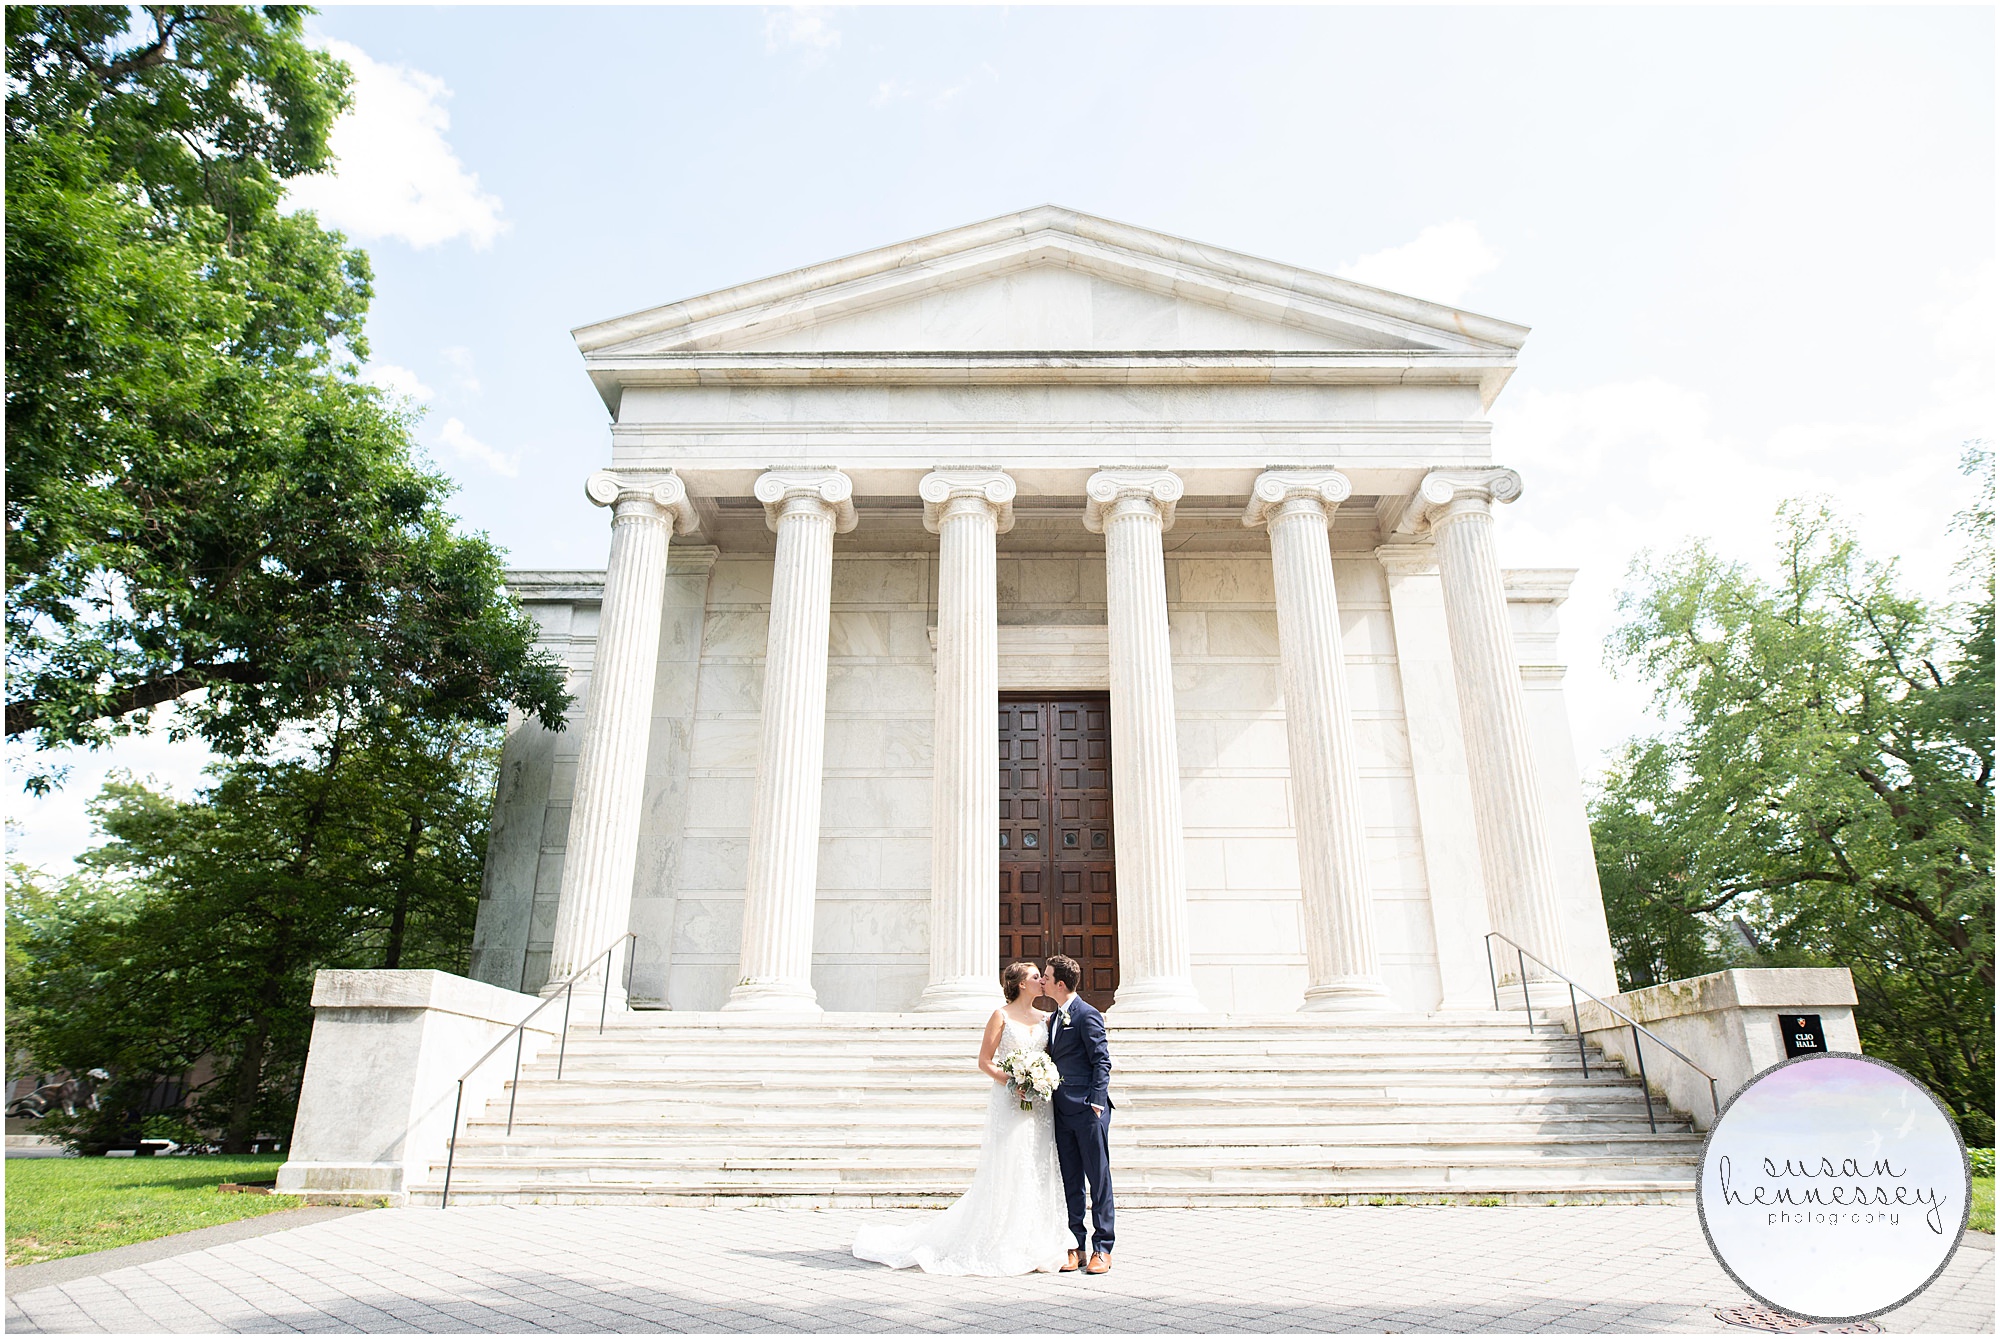 Bride and groom at Clio Hall at Princeton University.